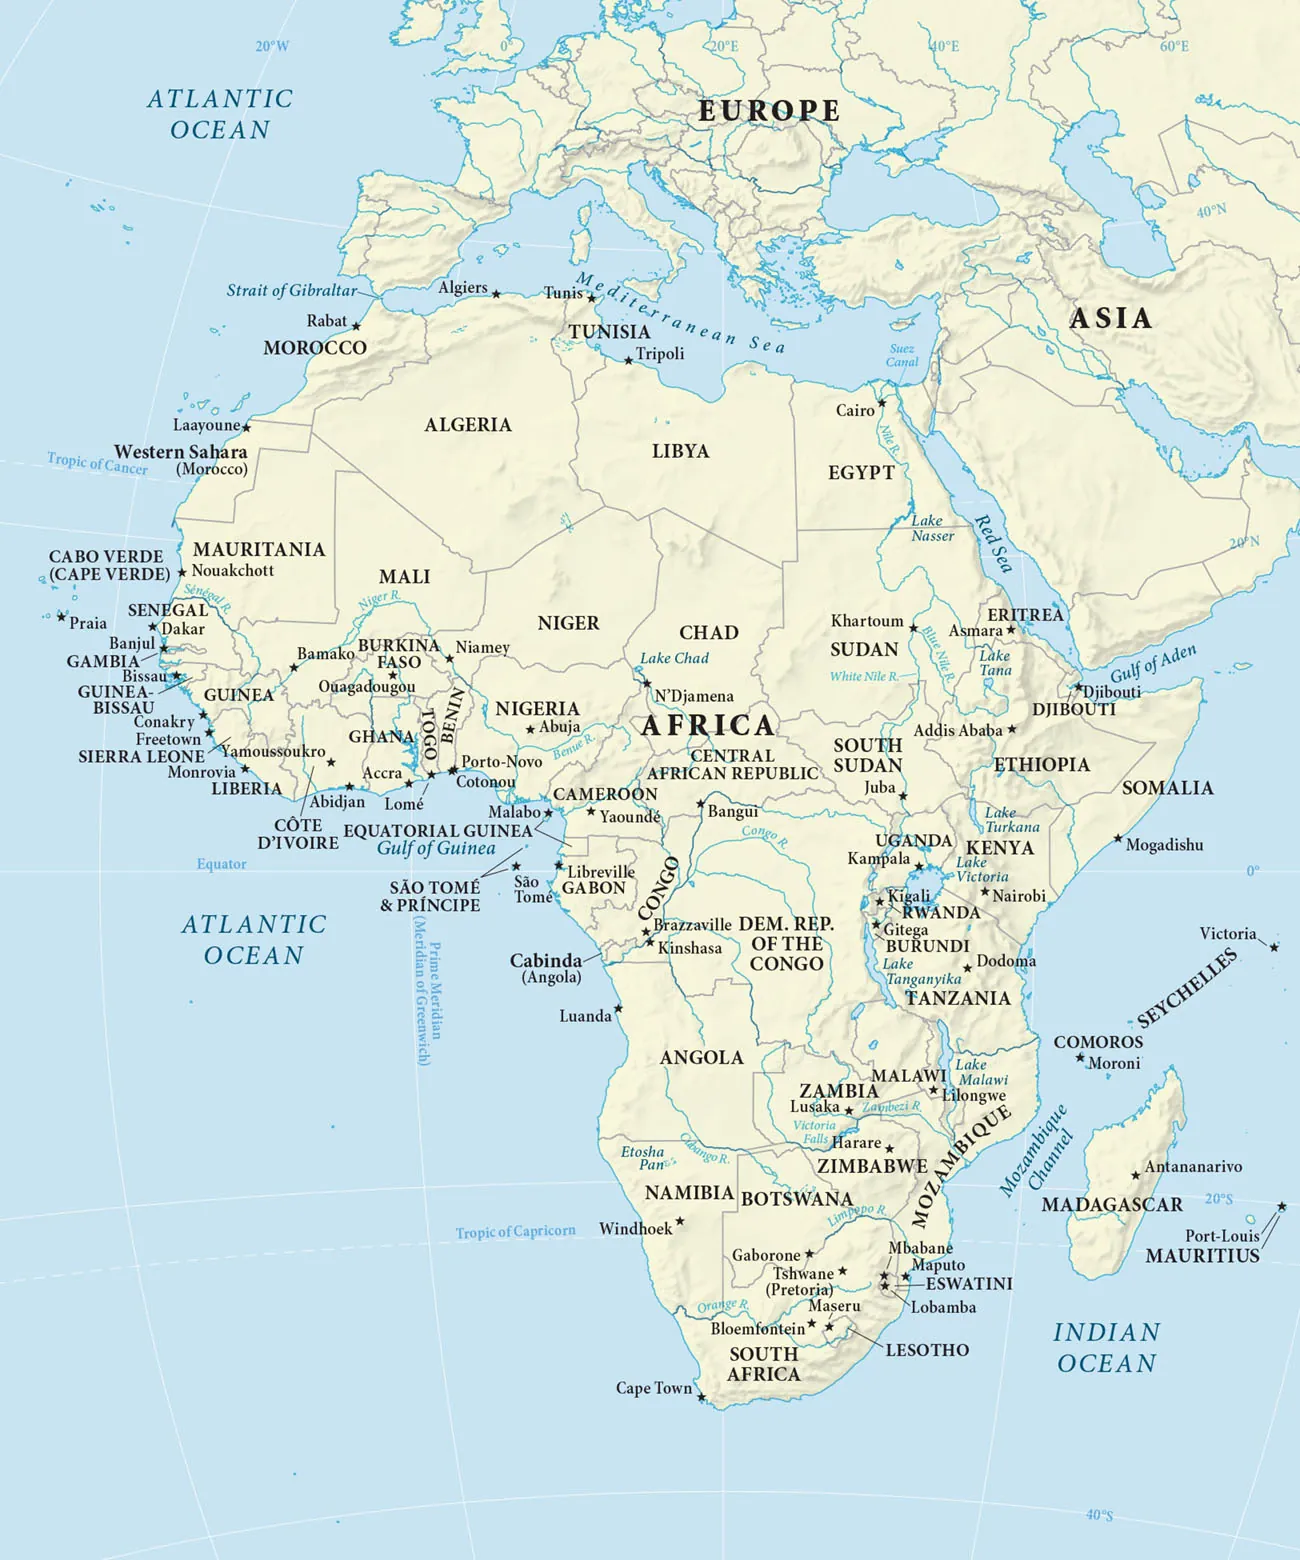 Map of the African continent.